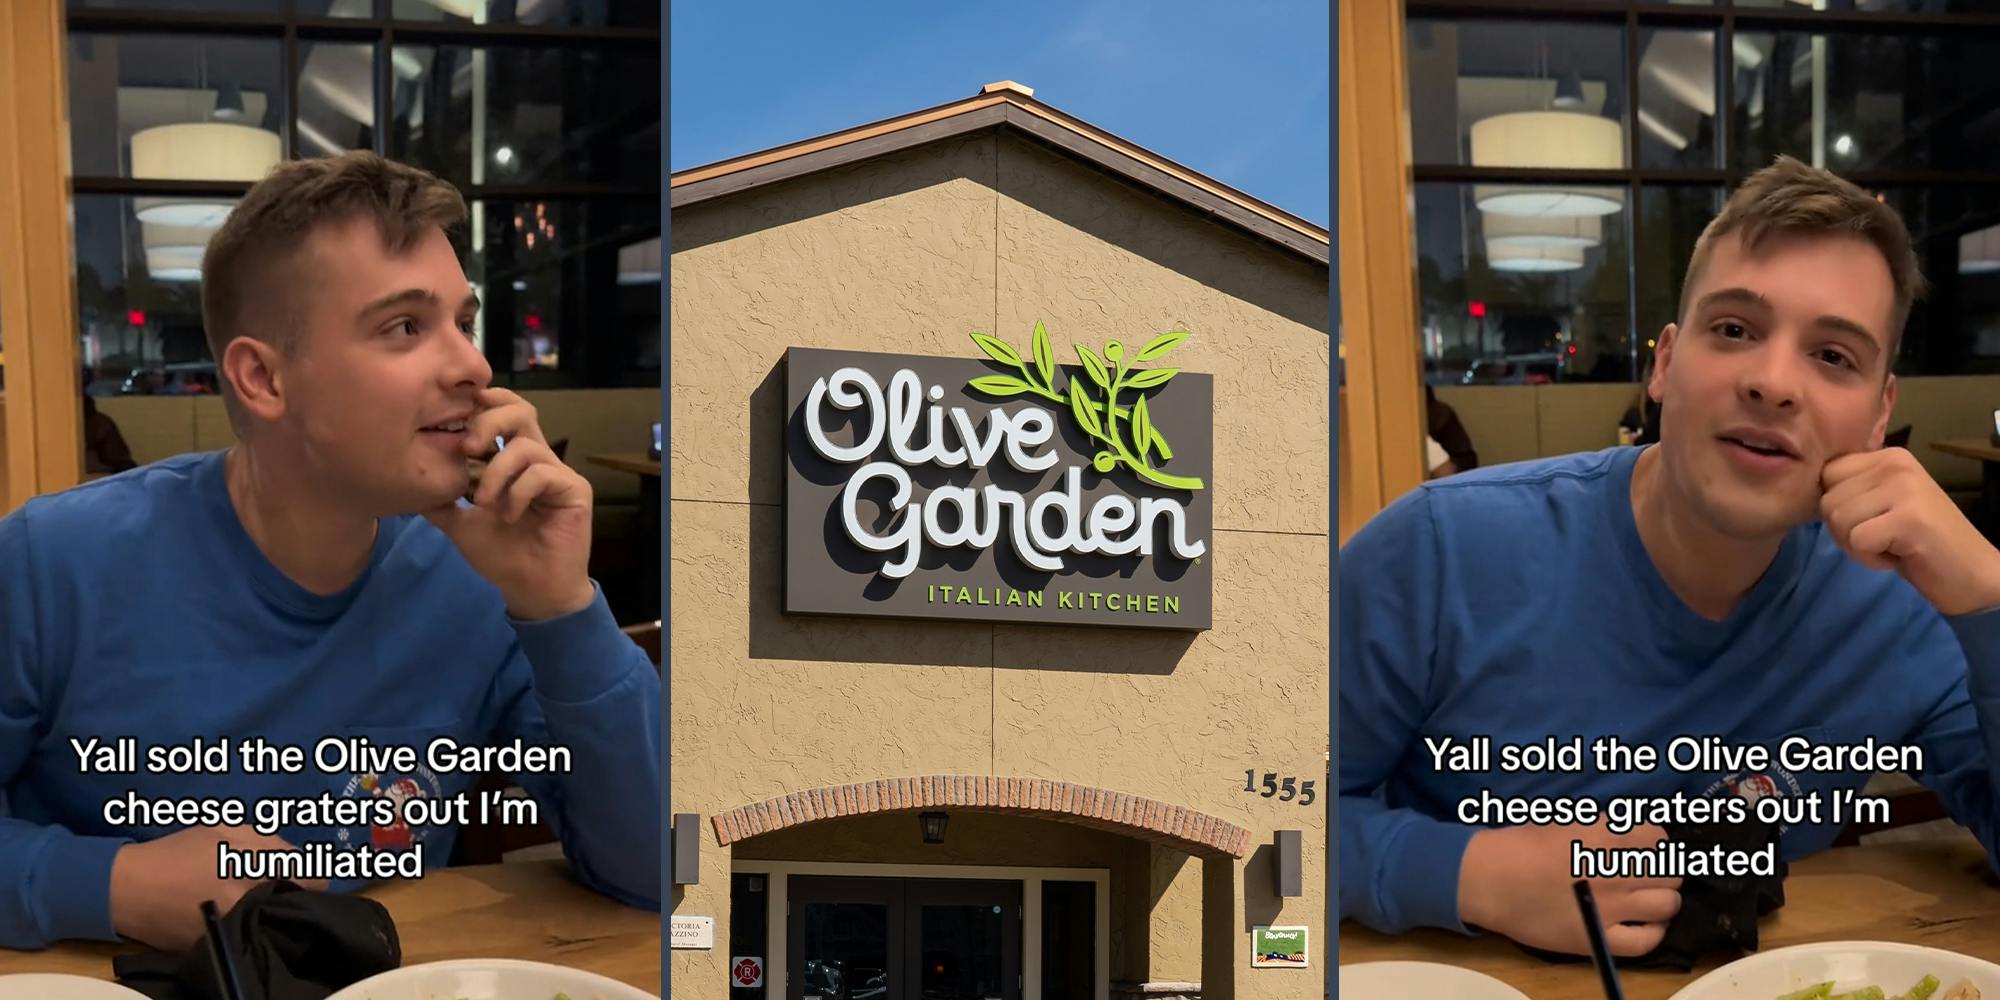 Man Tries To Order Cheese Grater From Olive Garden. It’s a Fail